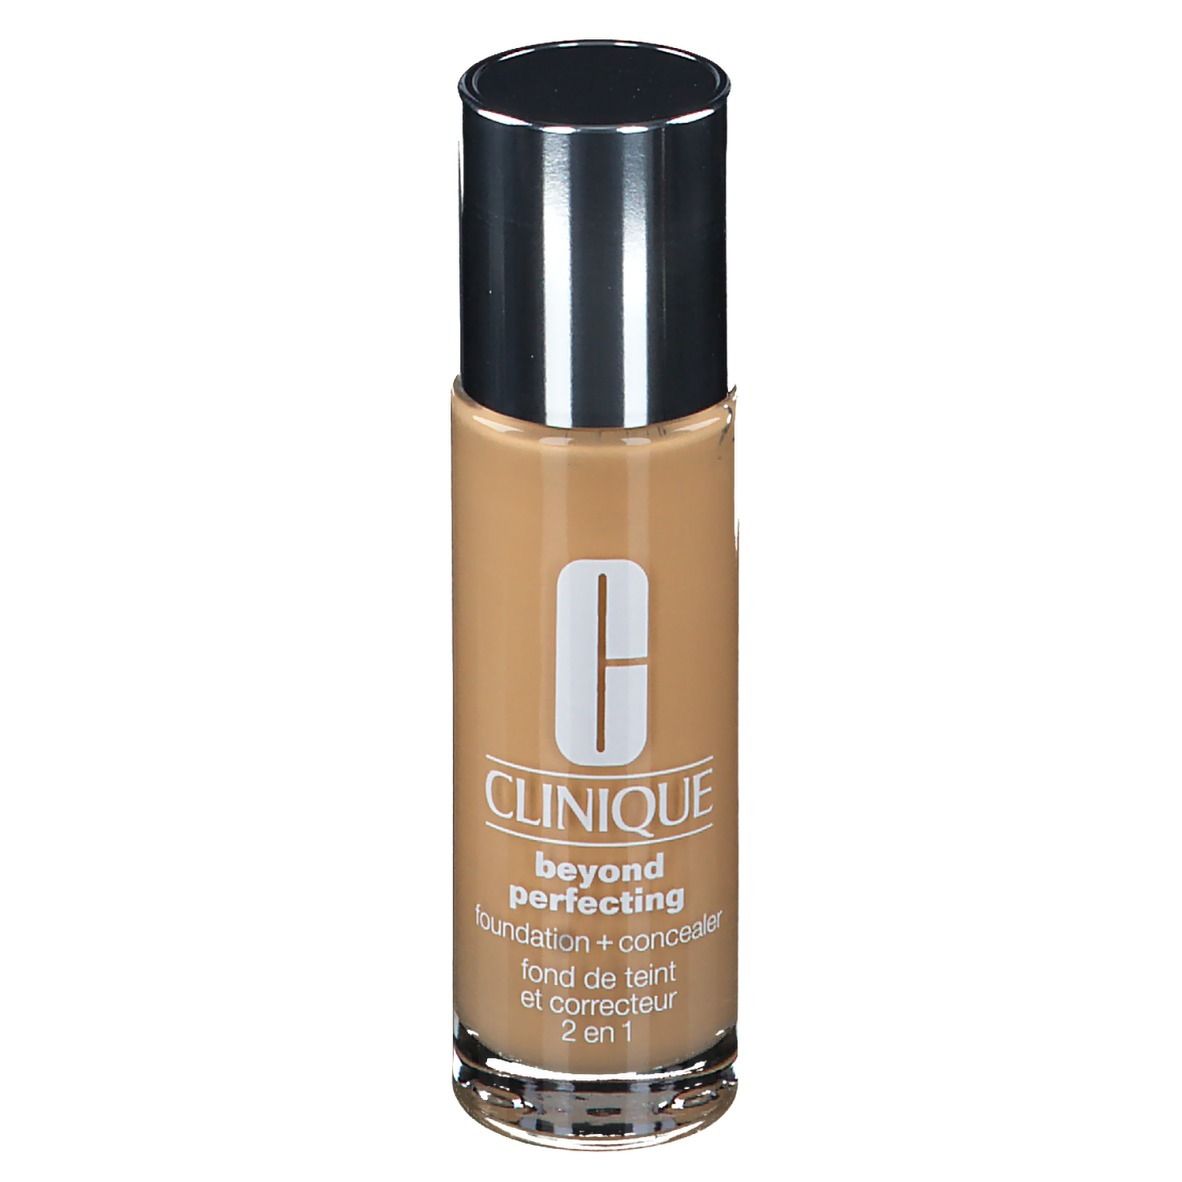 Clinique Beyond Perfecting Foundation and Concealer 08 Golden Neutral